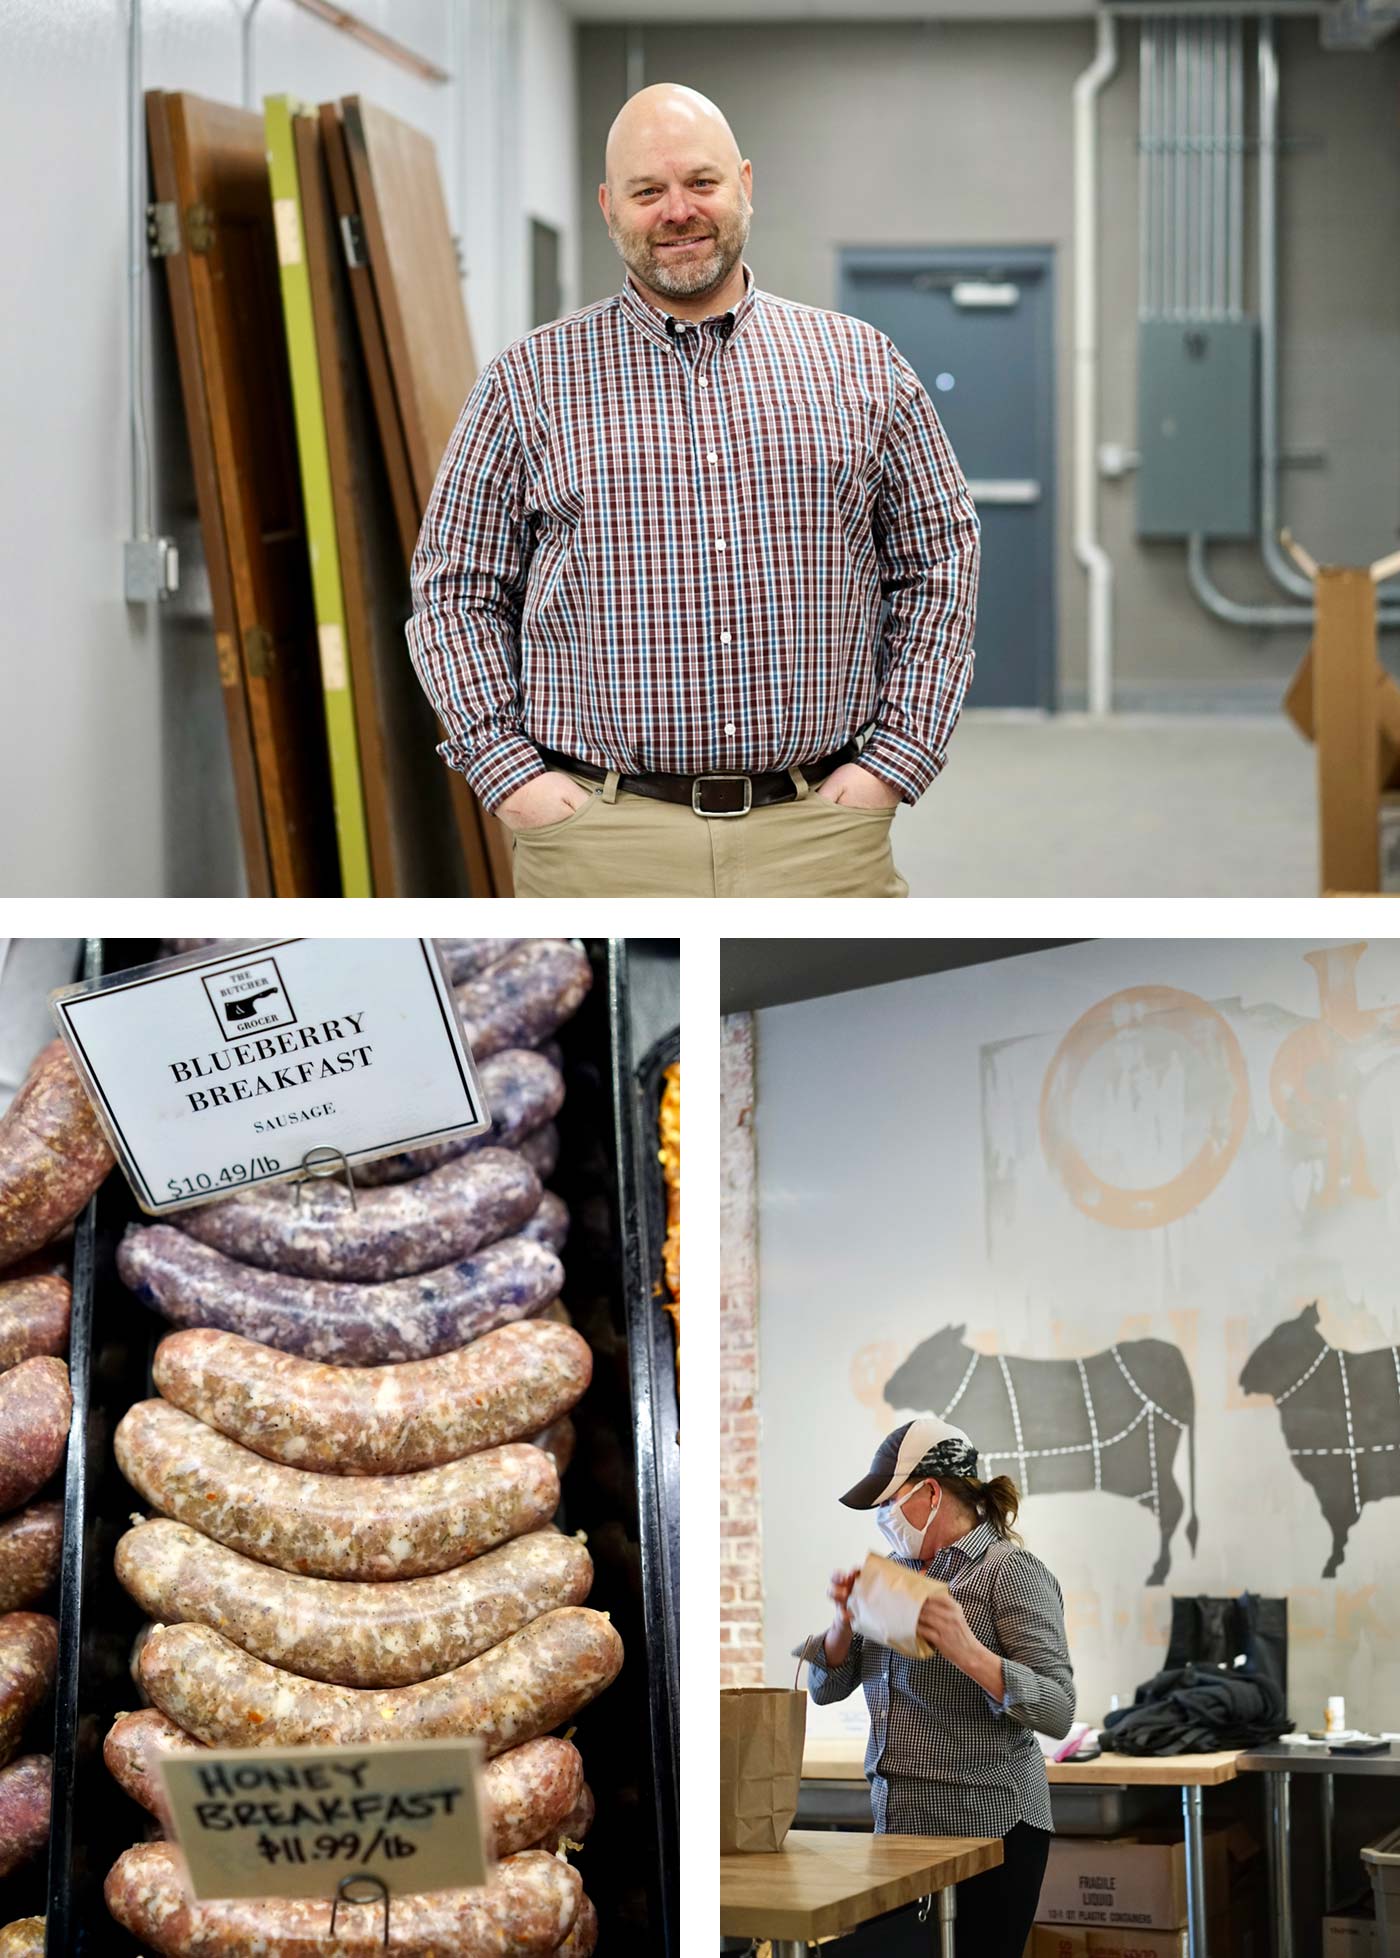 Top: Tony Tanner at his new wholesale facility, TB&G Meats. Bottom Left: Customers face a wide variety of sausage choices. Bottom Right: The small shop allows few staff and customers at a time during the pandemic.